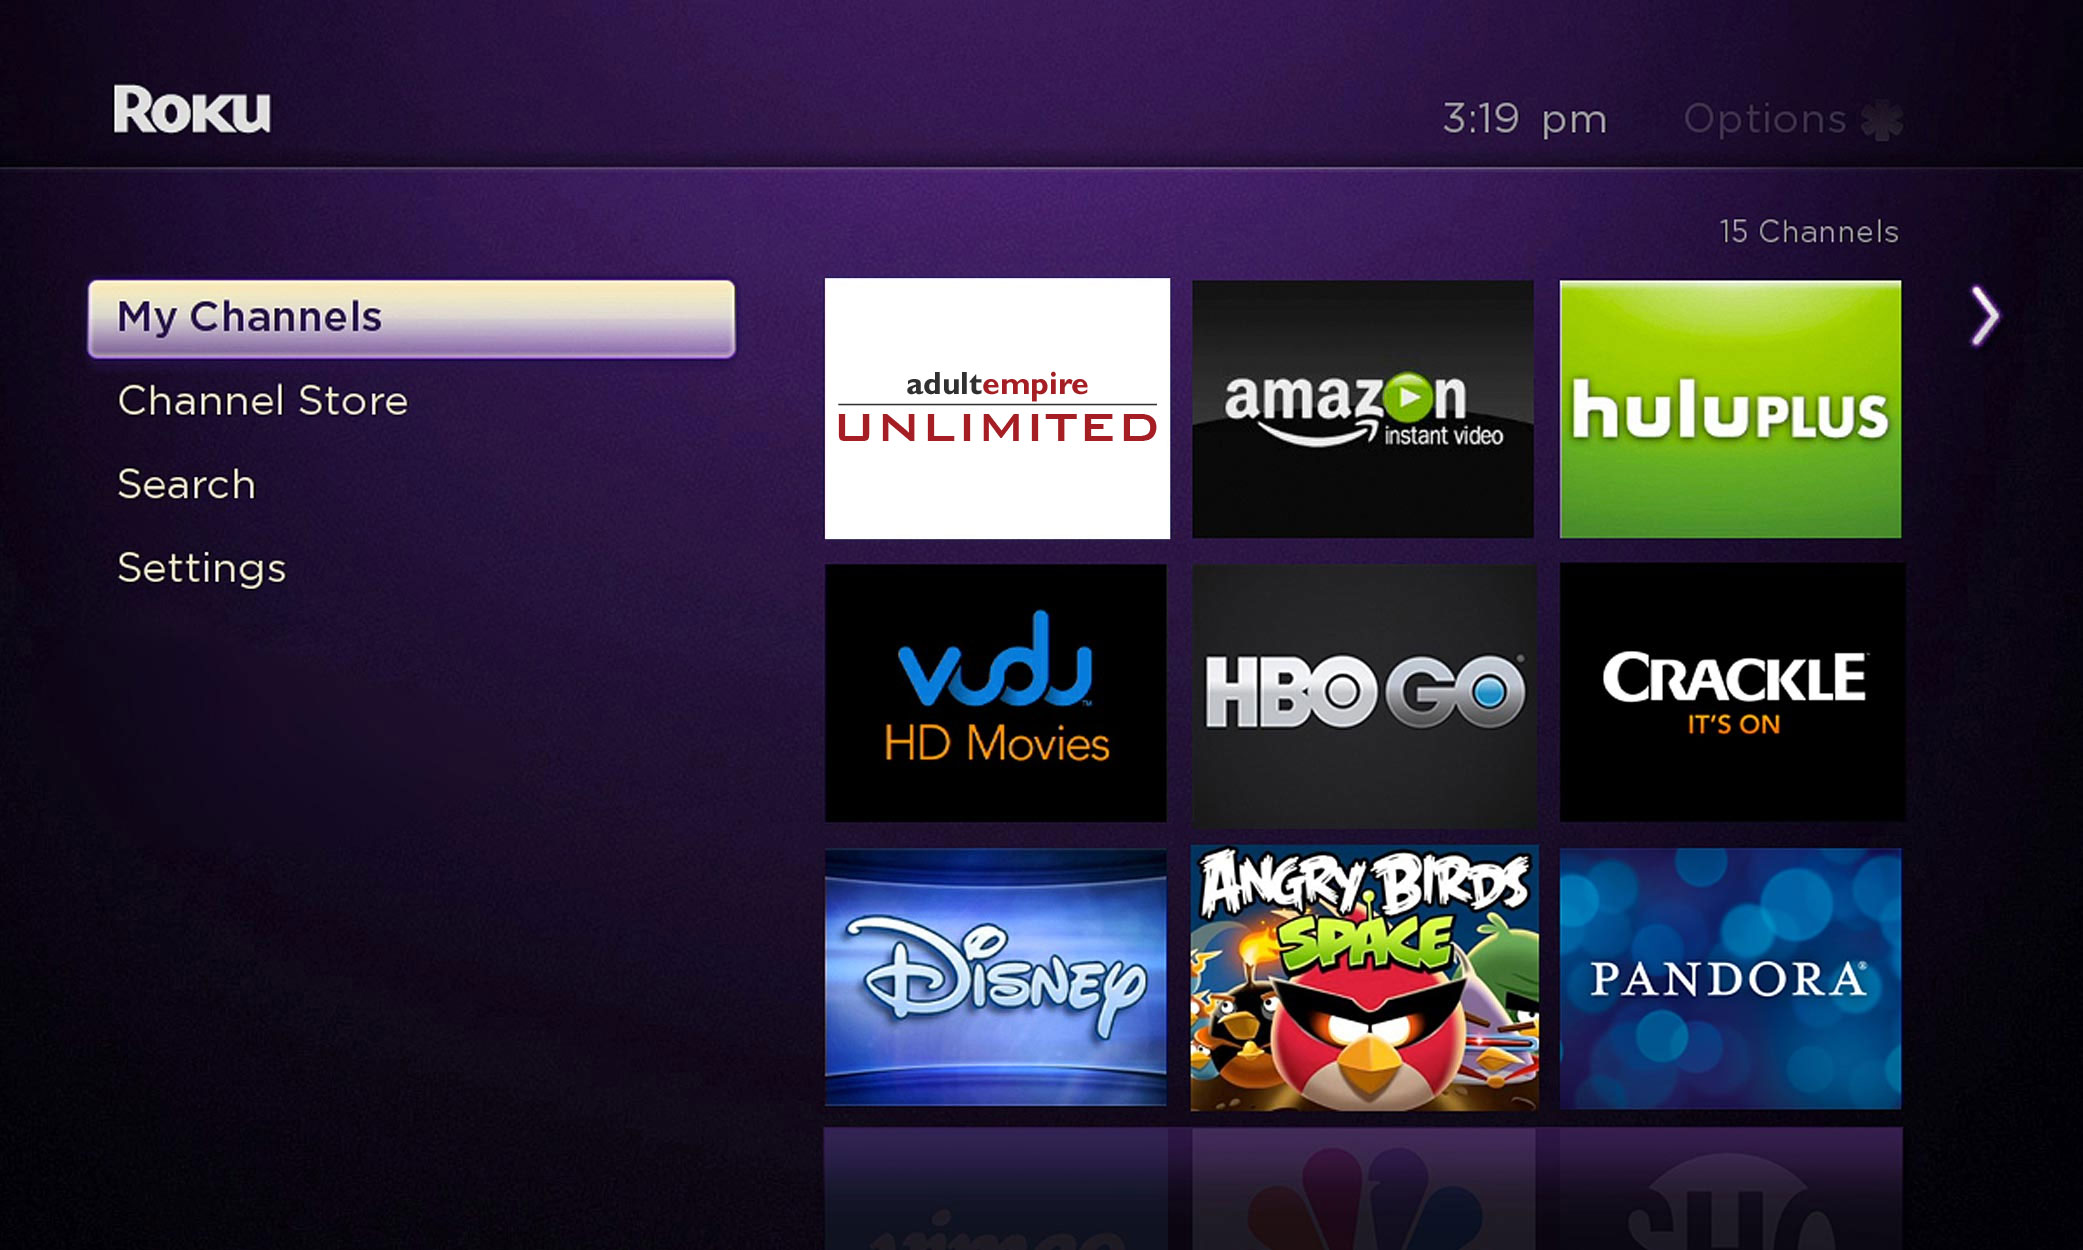 1. Roku website. to add Adult Empire Unlimited to your Roku channel lineup....